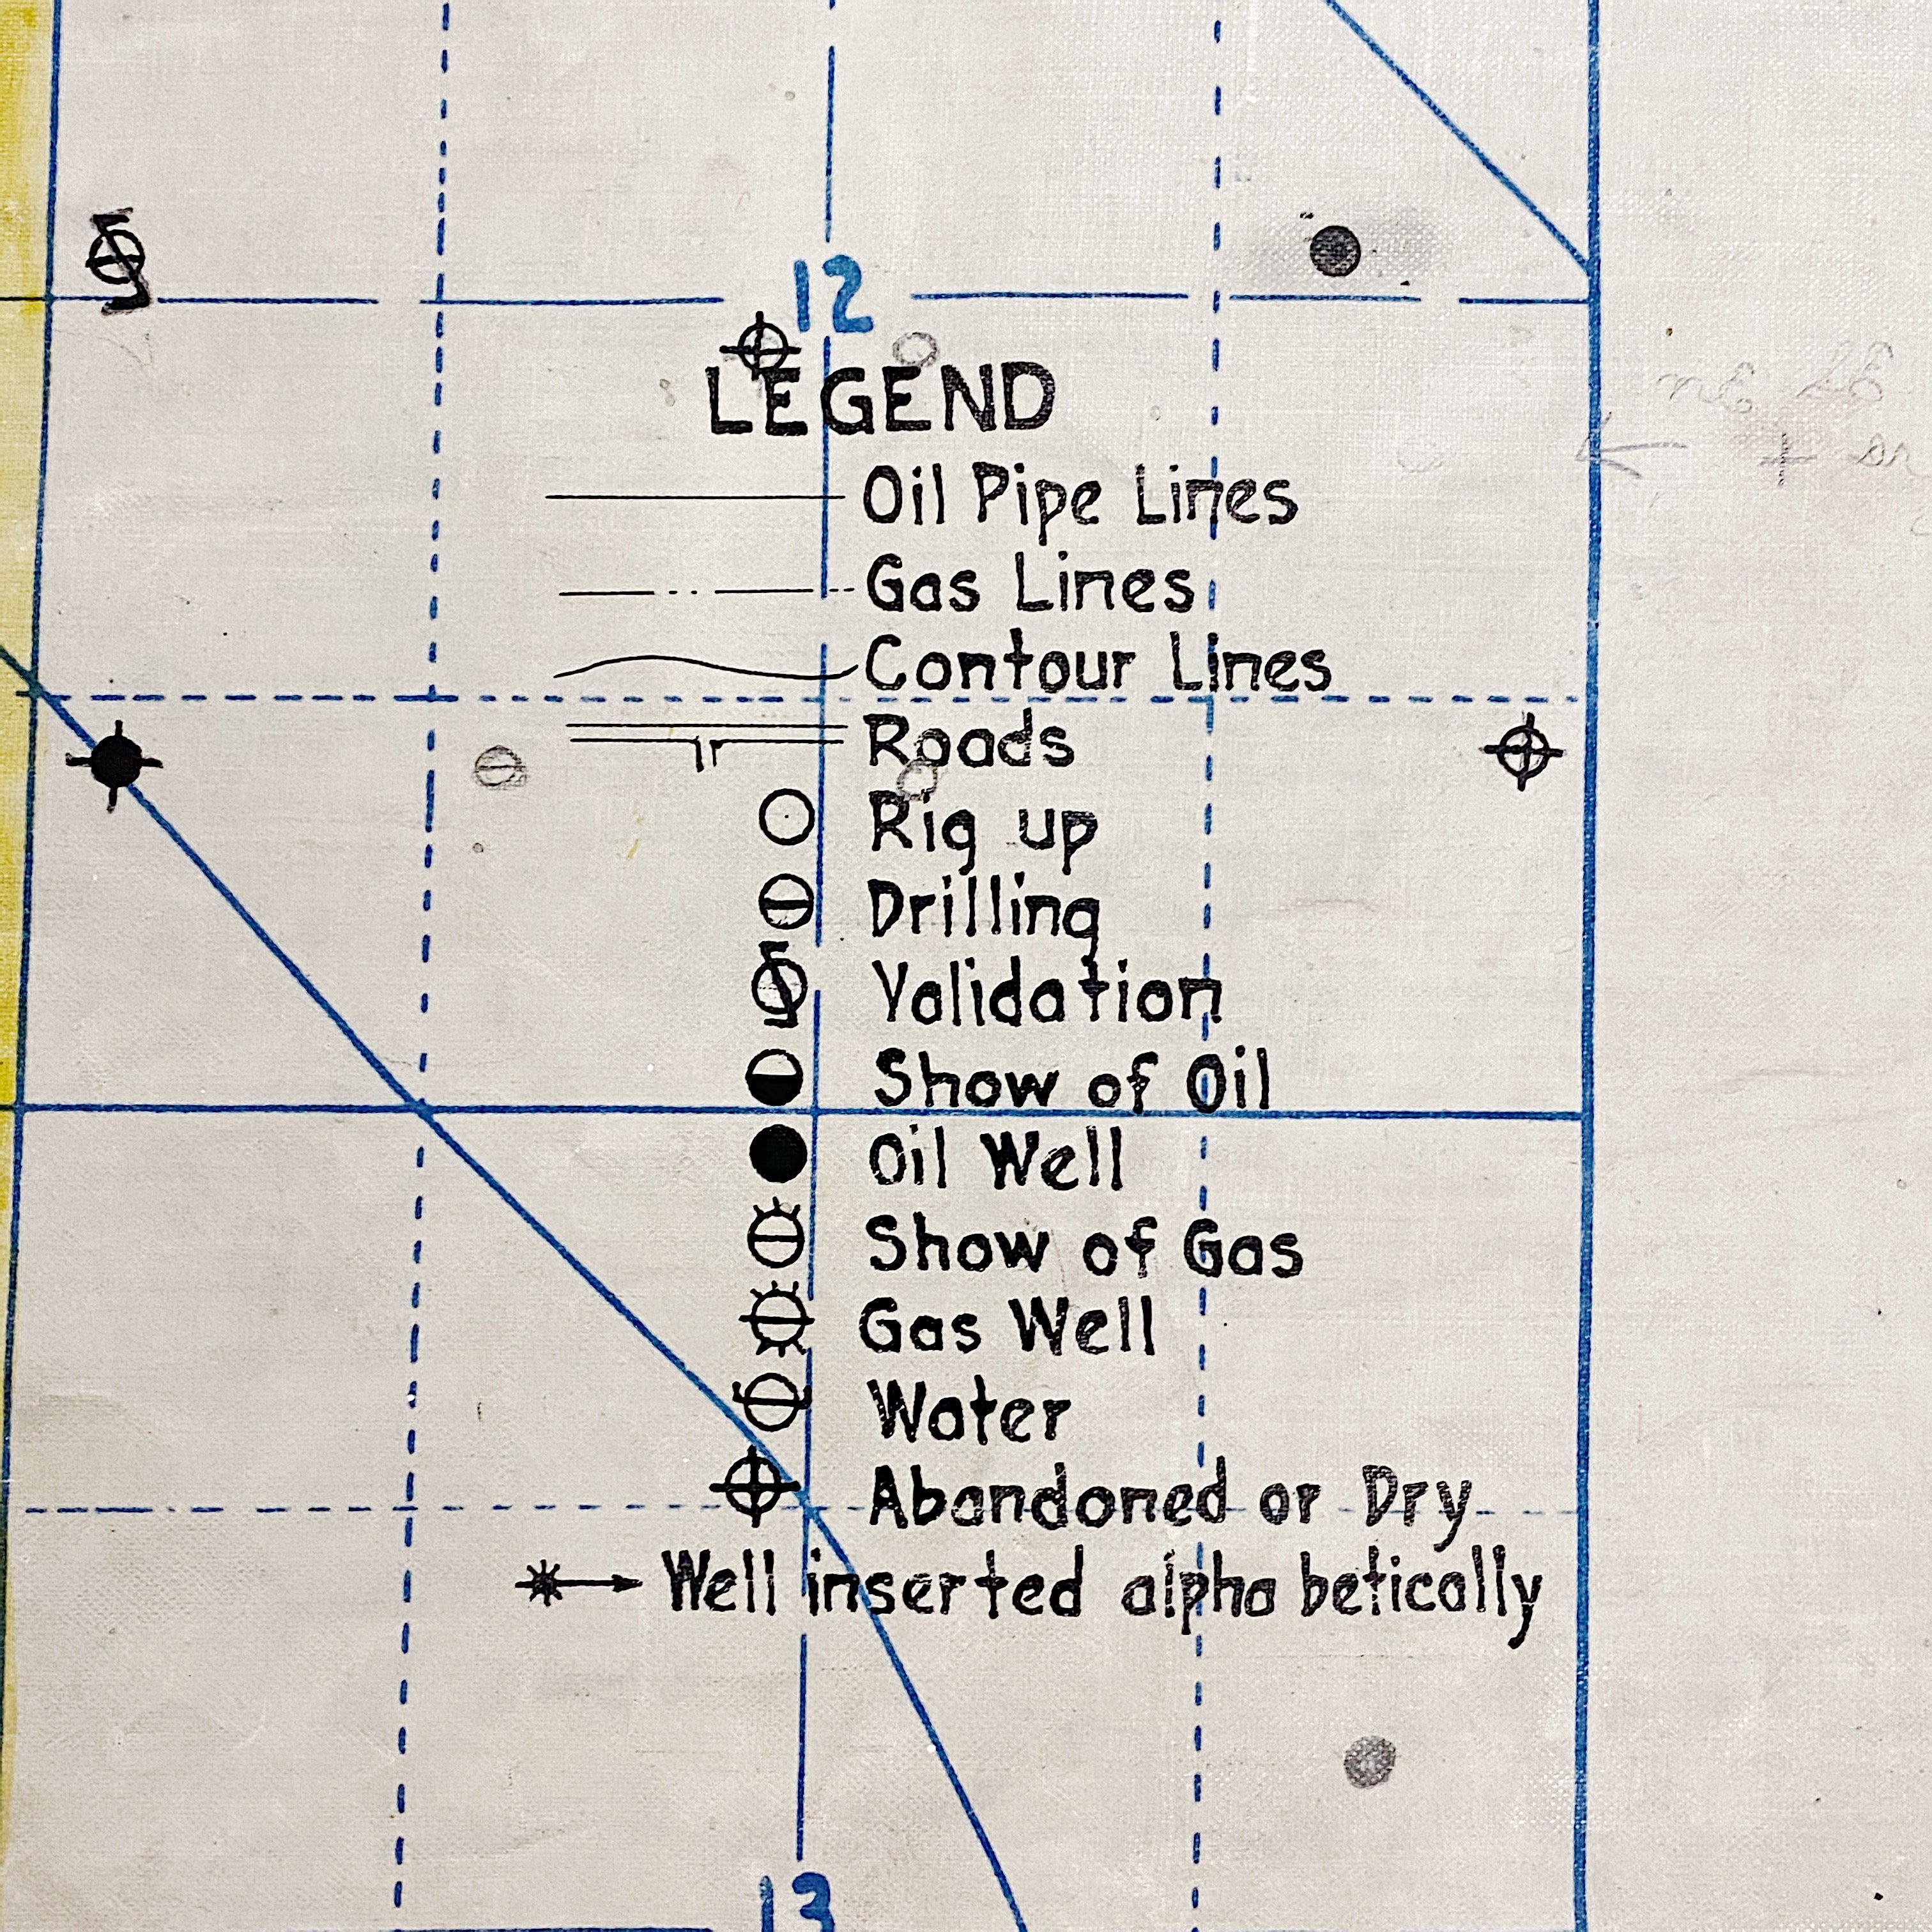 Legend for Rare 1920s Oil Field Map with Hand Painted Land Rights Grids - Louis W. Hill Estate - 53" x 37" - Huge Wall Art - Early Data Visualization